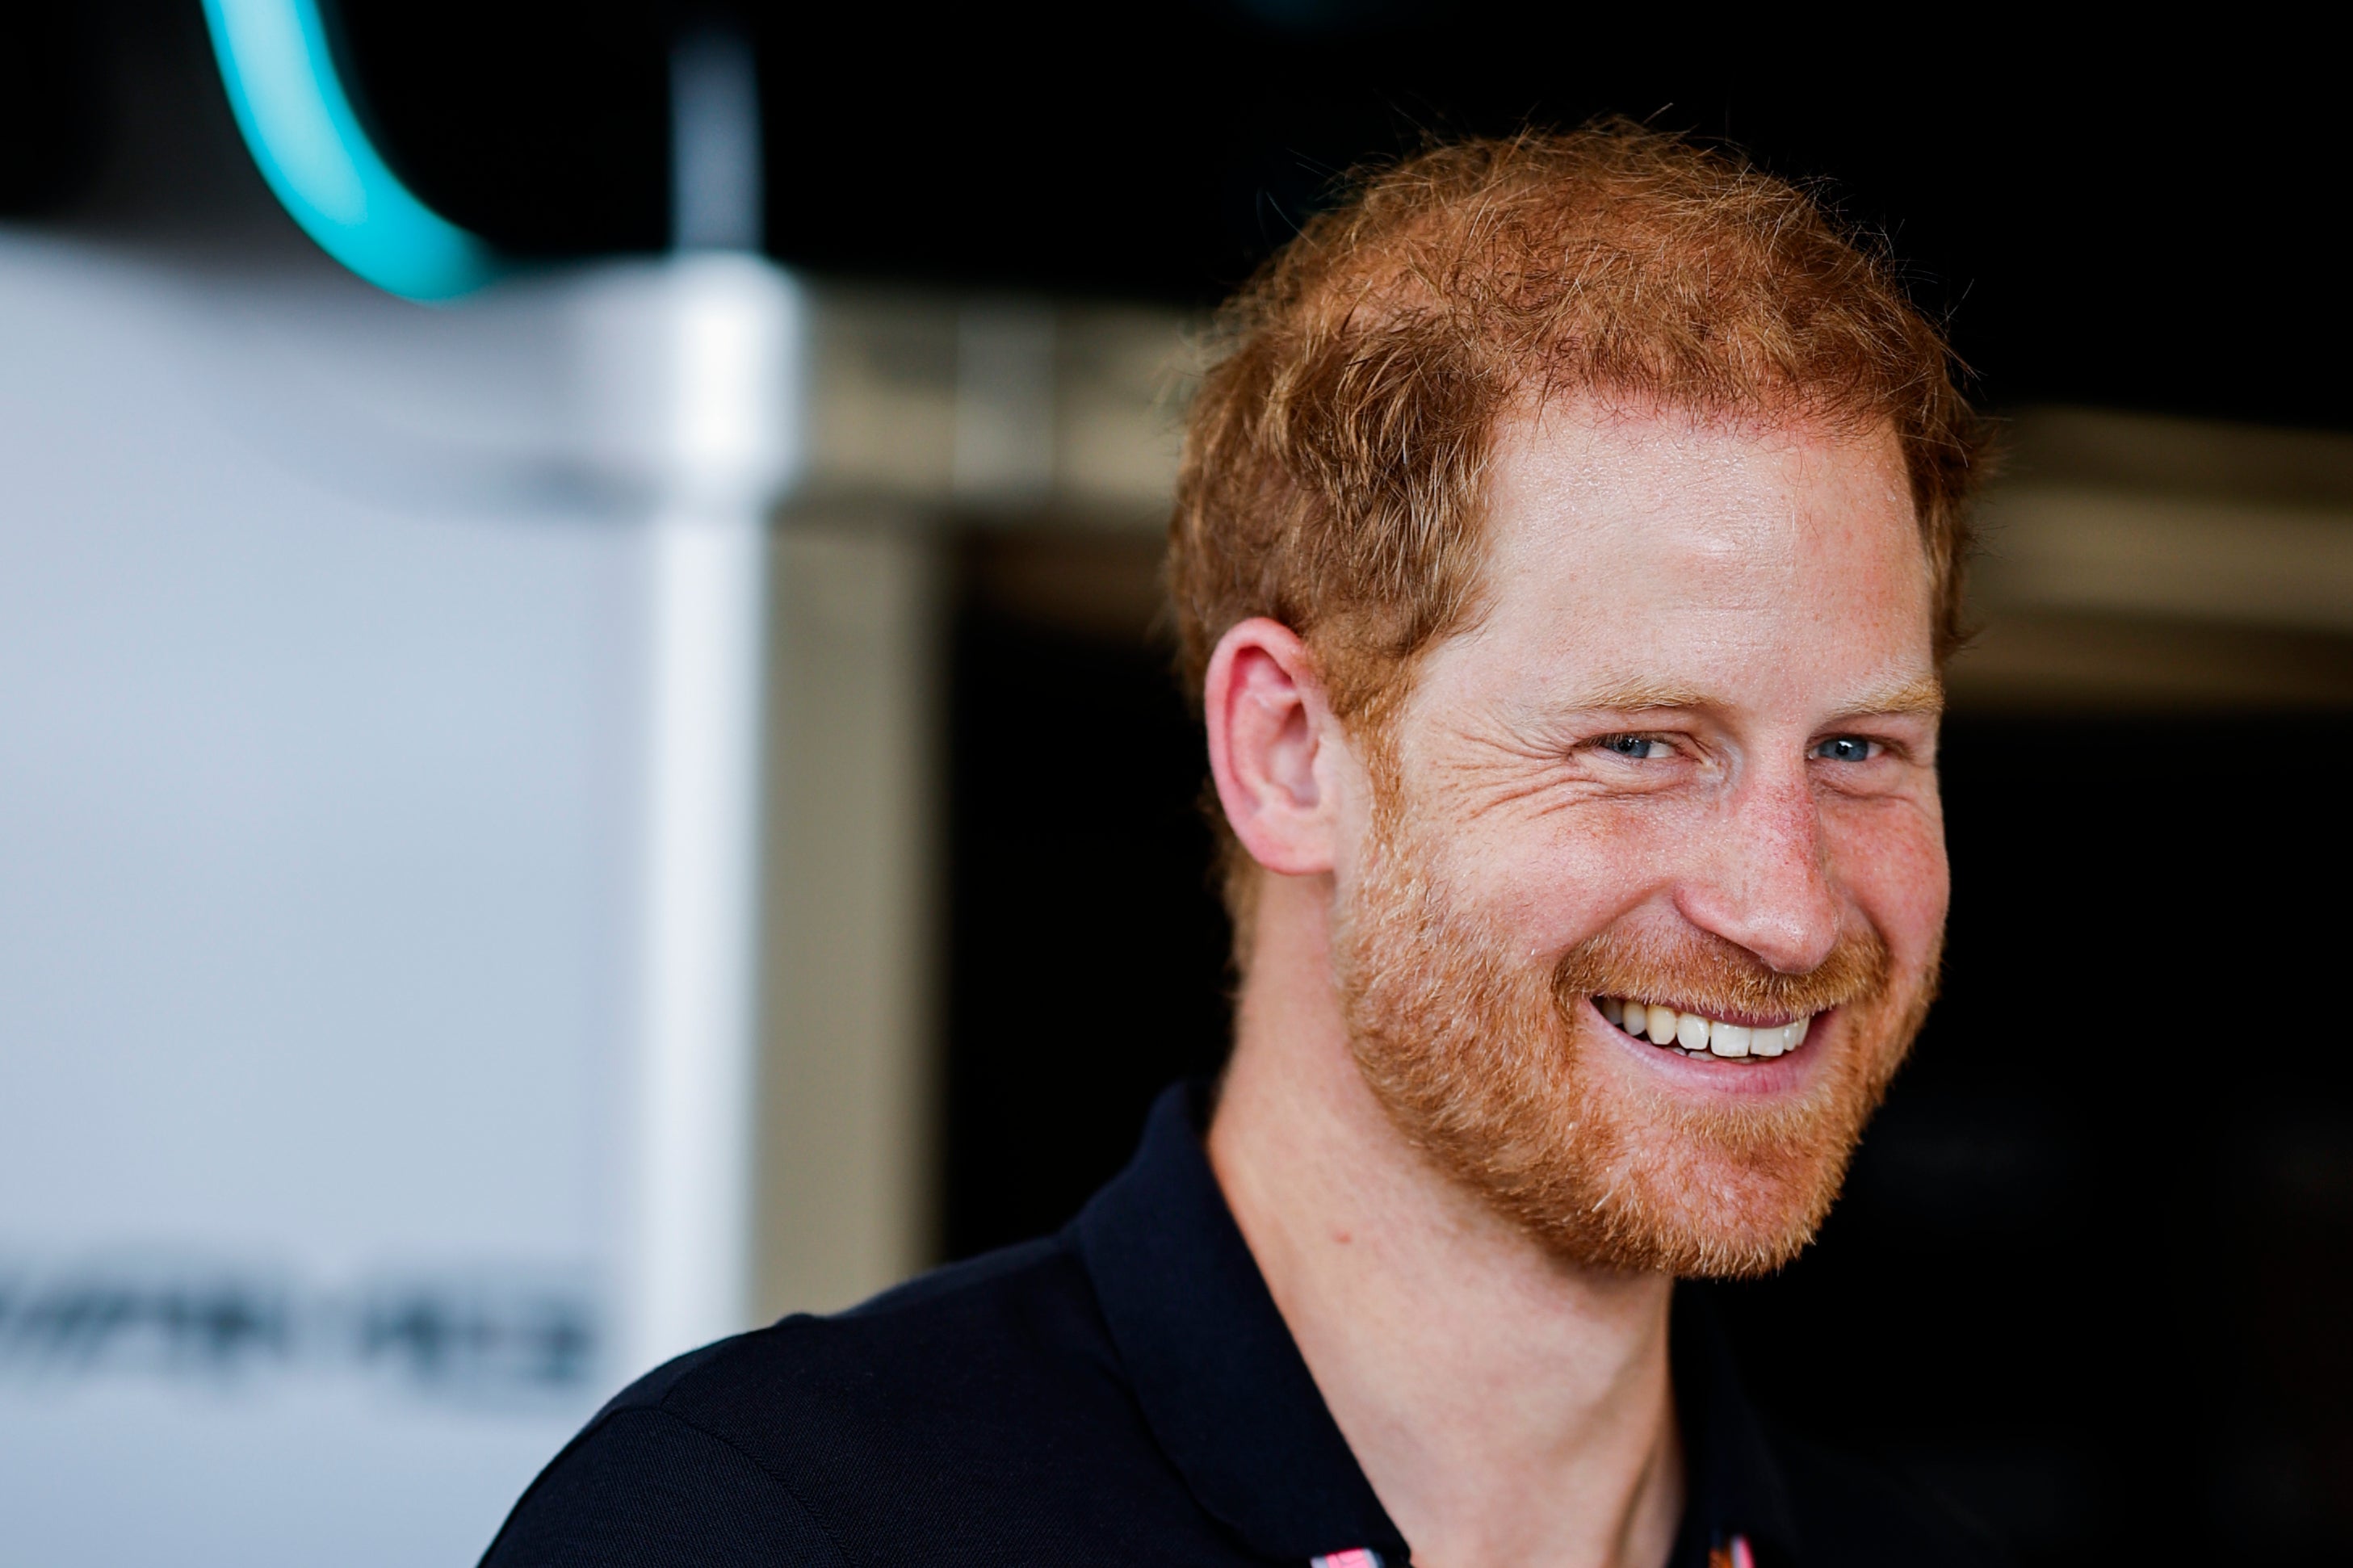 Prince Harry is set to visit the UK for the first time since his sister-in-law Kate’s cancer diagnosis